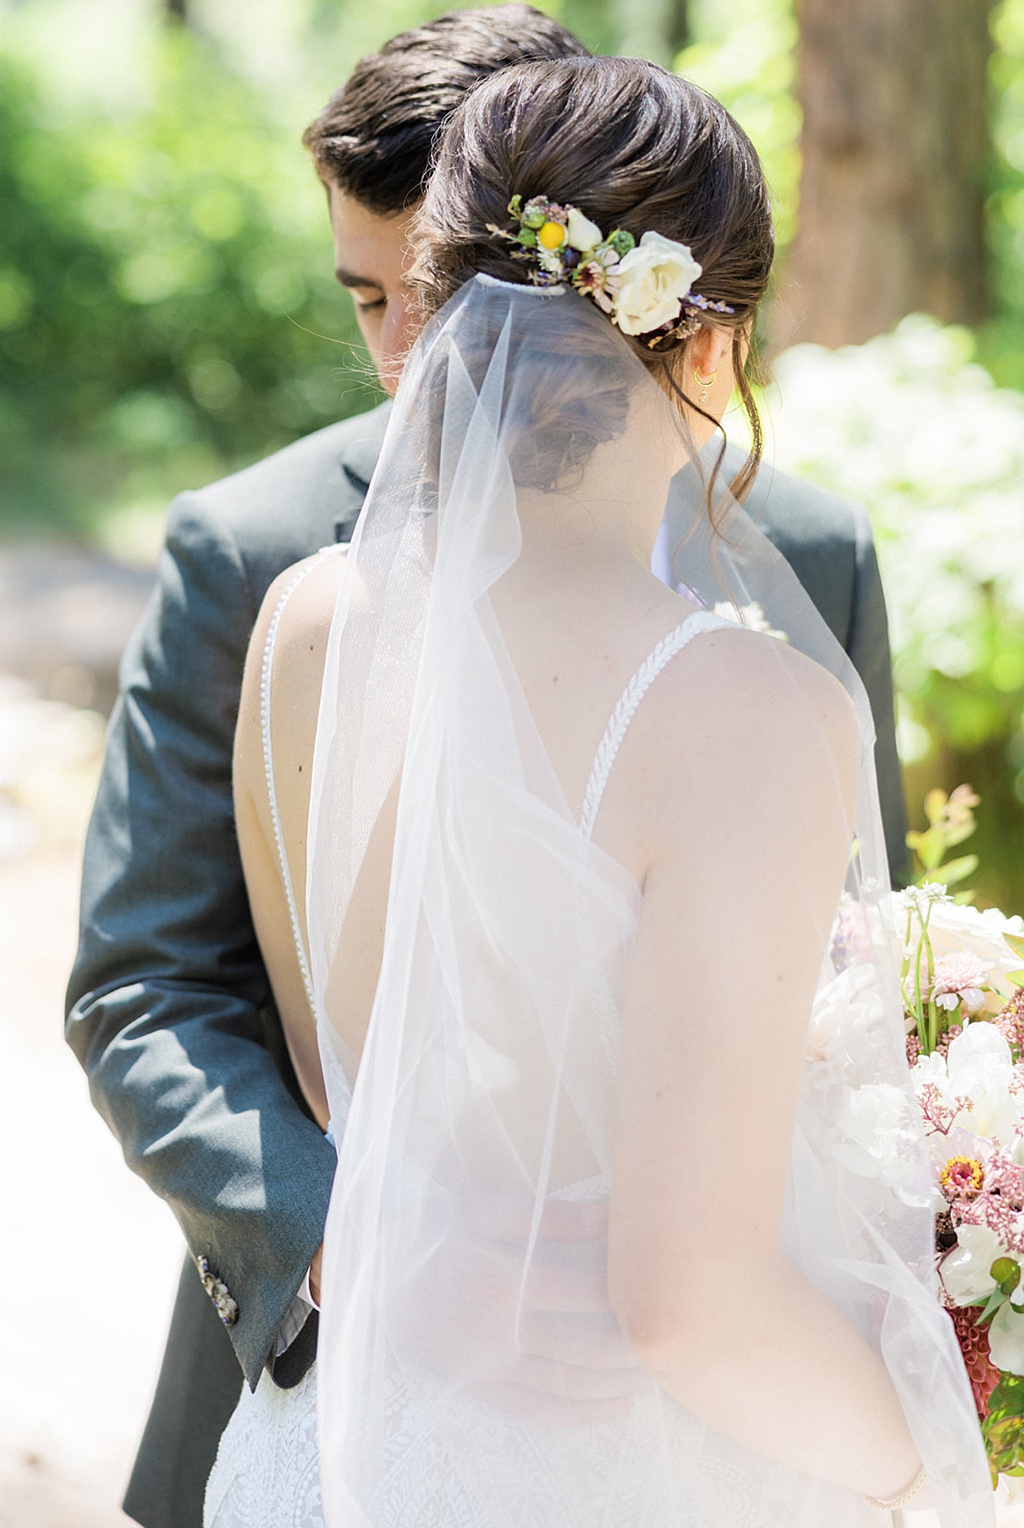 The bride and groom embrace, showing off her veil and hair flowers